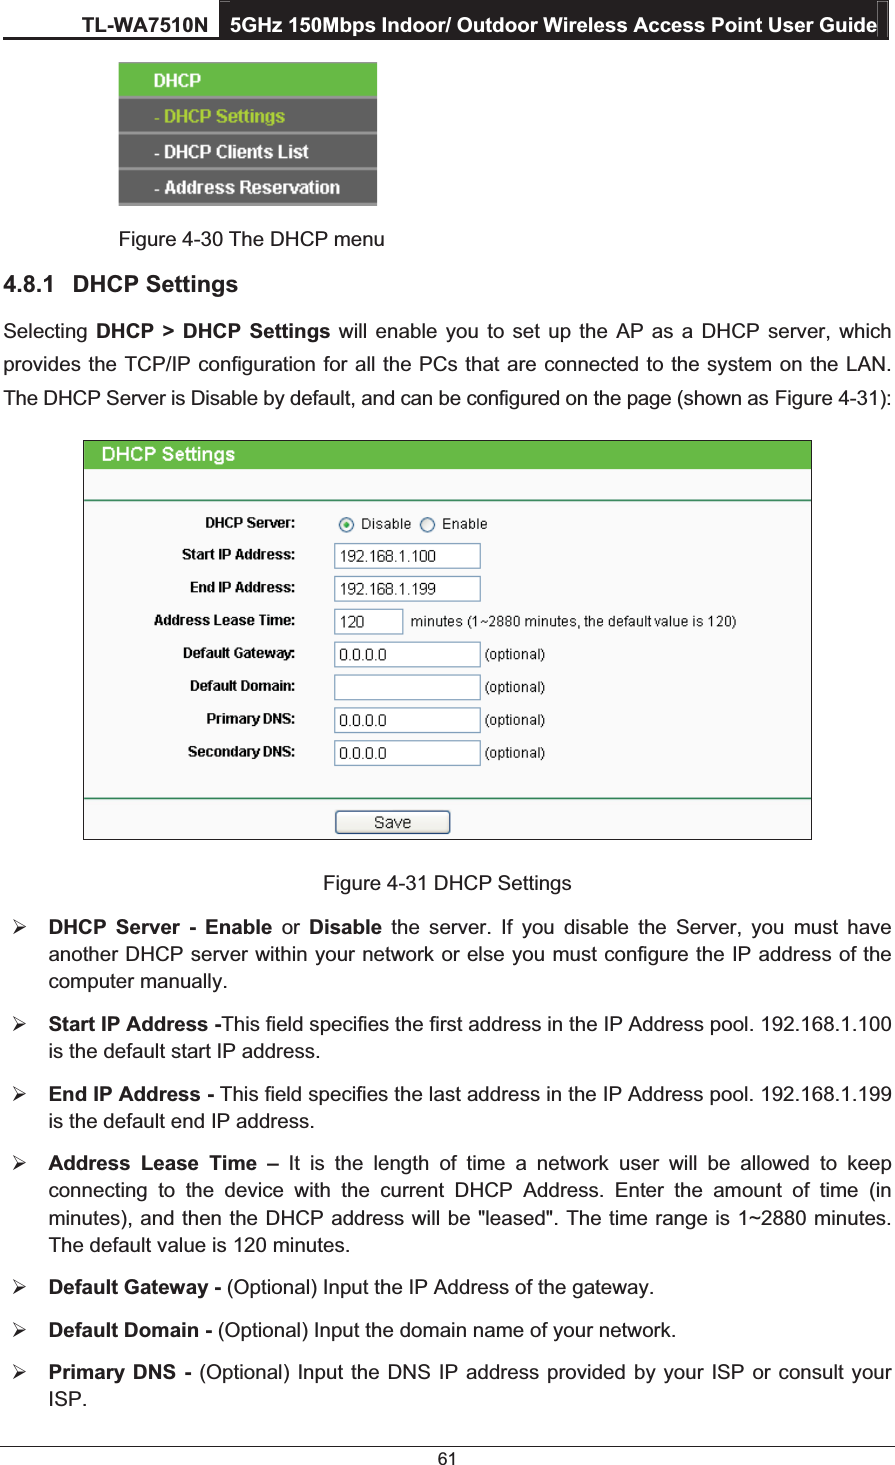 TL-WA7510N 5GHz 150Mbps Indoor/ Outdoor Wireless Access Point User Guide 61      Figure 4-30 The DHCP menu 4.8.1 DHCP Settings Selecting  DHCP &gt; DHCP Settings will enable you to set up the AP as a DHCP server, which provides the TCP/IP configuration for all the PCs that are connected to the system on the LAN. The DHCP Server is Disable by default, and can be configured on the page (shown as Figure 4-31):  Figure 4-31 DHCP Settings ¾ DHCP Server - Enable or  Disable the server. If you disable the Server, you must have another DHCP server within your network or else you must configure the IP address of the computer manually. ¾ Start IP Address -This field specifies the first address in the IP Address pool. 192.168.1.100 is the default start IP address. ¾ End IP Address - This field specifies the last address in the IP Address pool. 192.168.1.199 is the default end IP address. ¾ Address Lease Time – It is the length of time a network user will be allowed to keep connecting to the device with the current DHCP Address. Enter the amount of time (in minutes), and then the DHCP address will be &quot;leased&quot;. The time range is 1~2880 minutes. The default value is 120 minutes. ¾ Default Gateway - (Optional) Input the IP Address of the gateway. ¾ Default Domain - (Optional) Input the domain name of your network. ¾ Primary DNS - (Optional) Input the DNS IP address provided by your ISP or consult your ISP. 